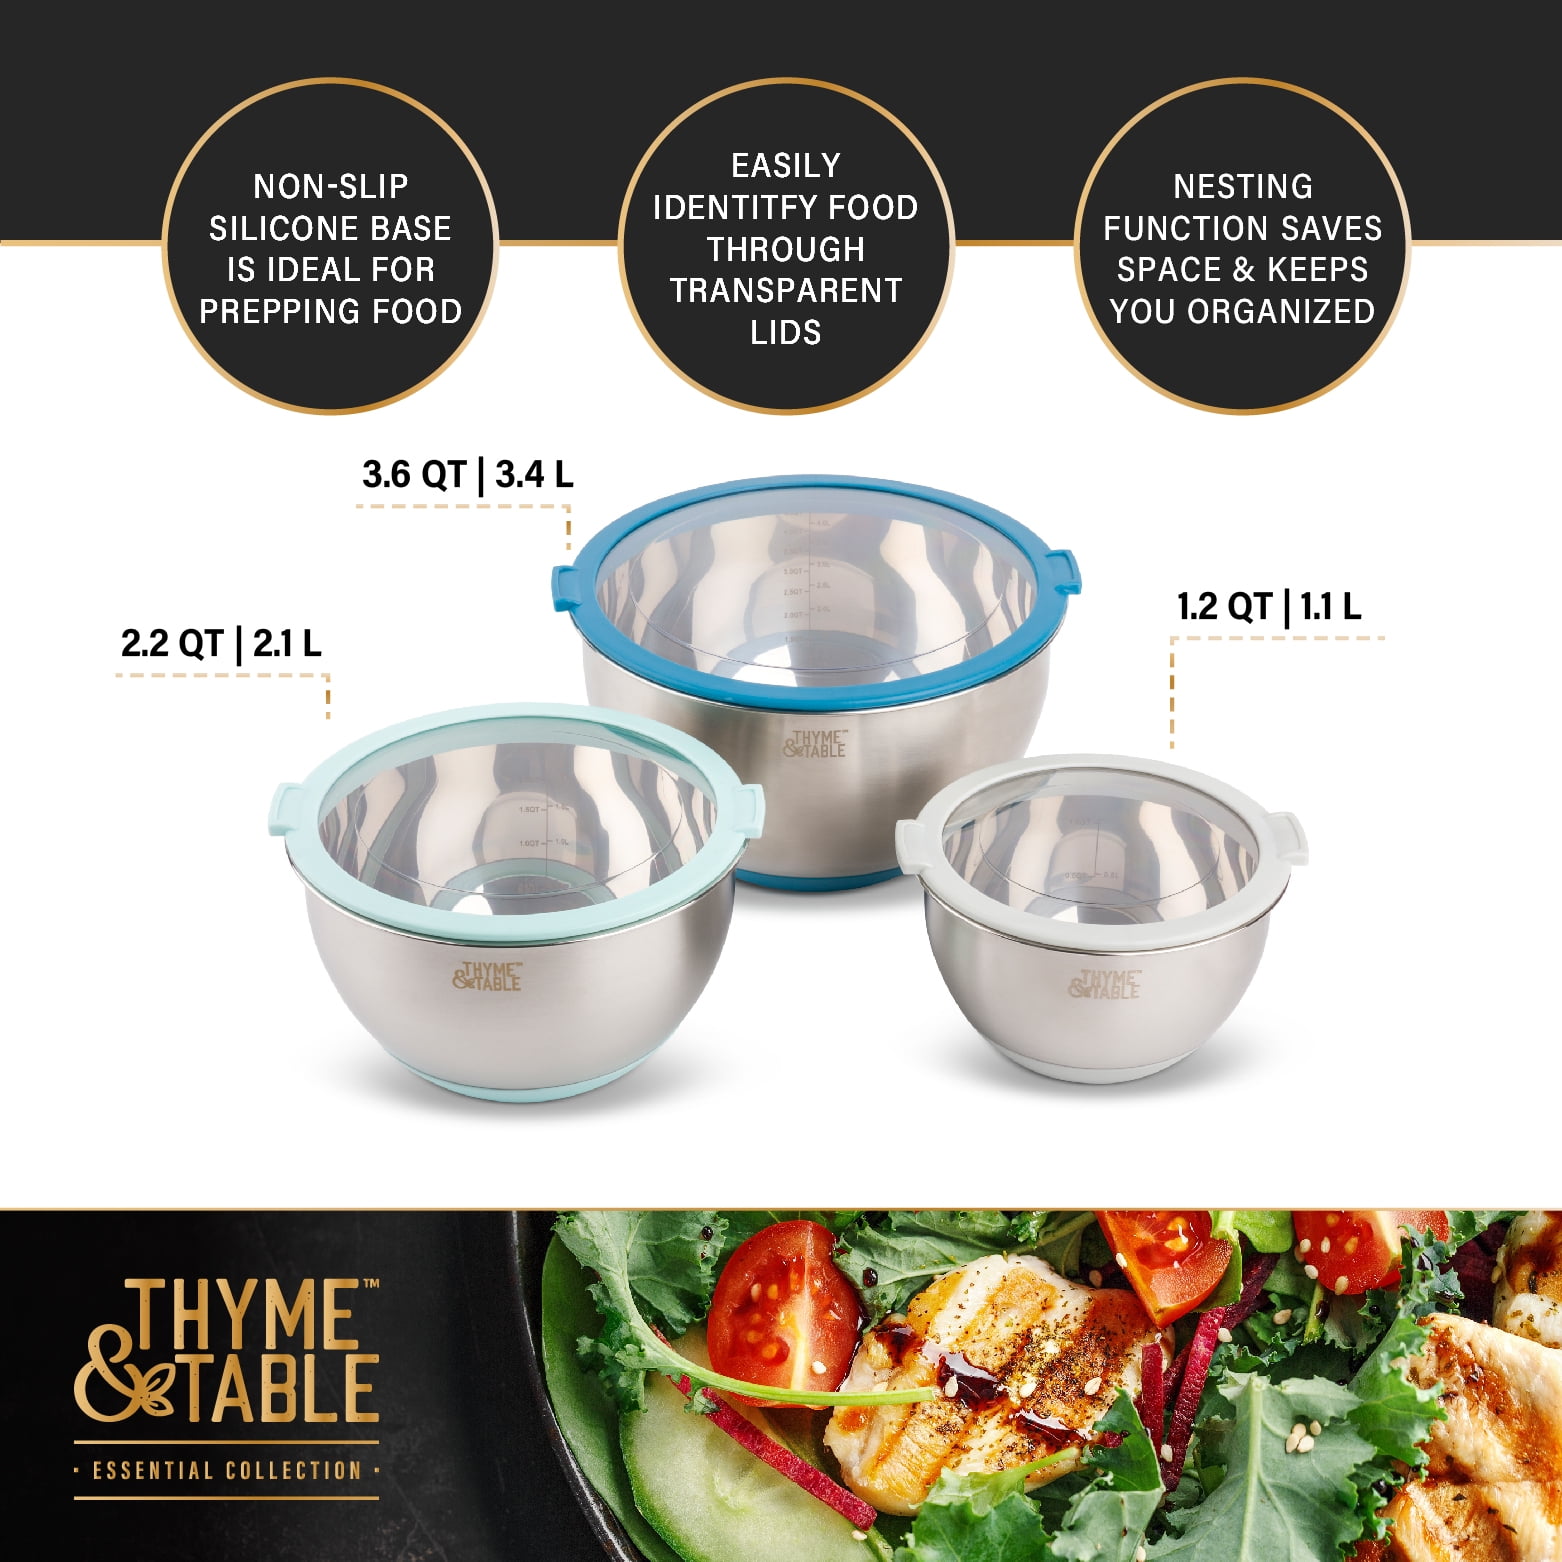 EATEX Stainless Steel Mixing Bowls - Mixing Bowl Set of 6 - Mixing Bowl  Sets For Kitchen Kitchen Nesting metal mixing Bowls With Measuring Cups And